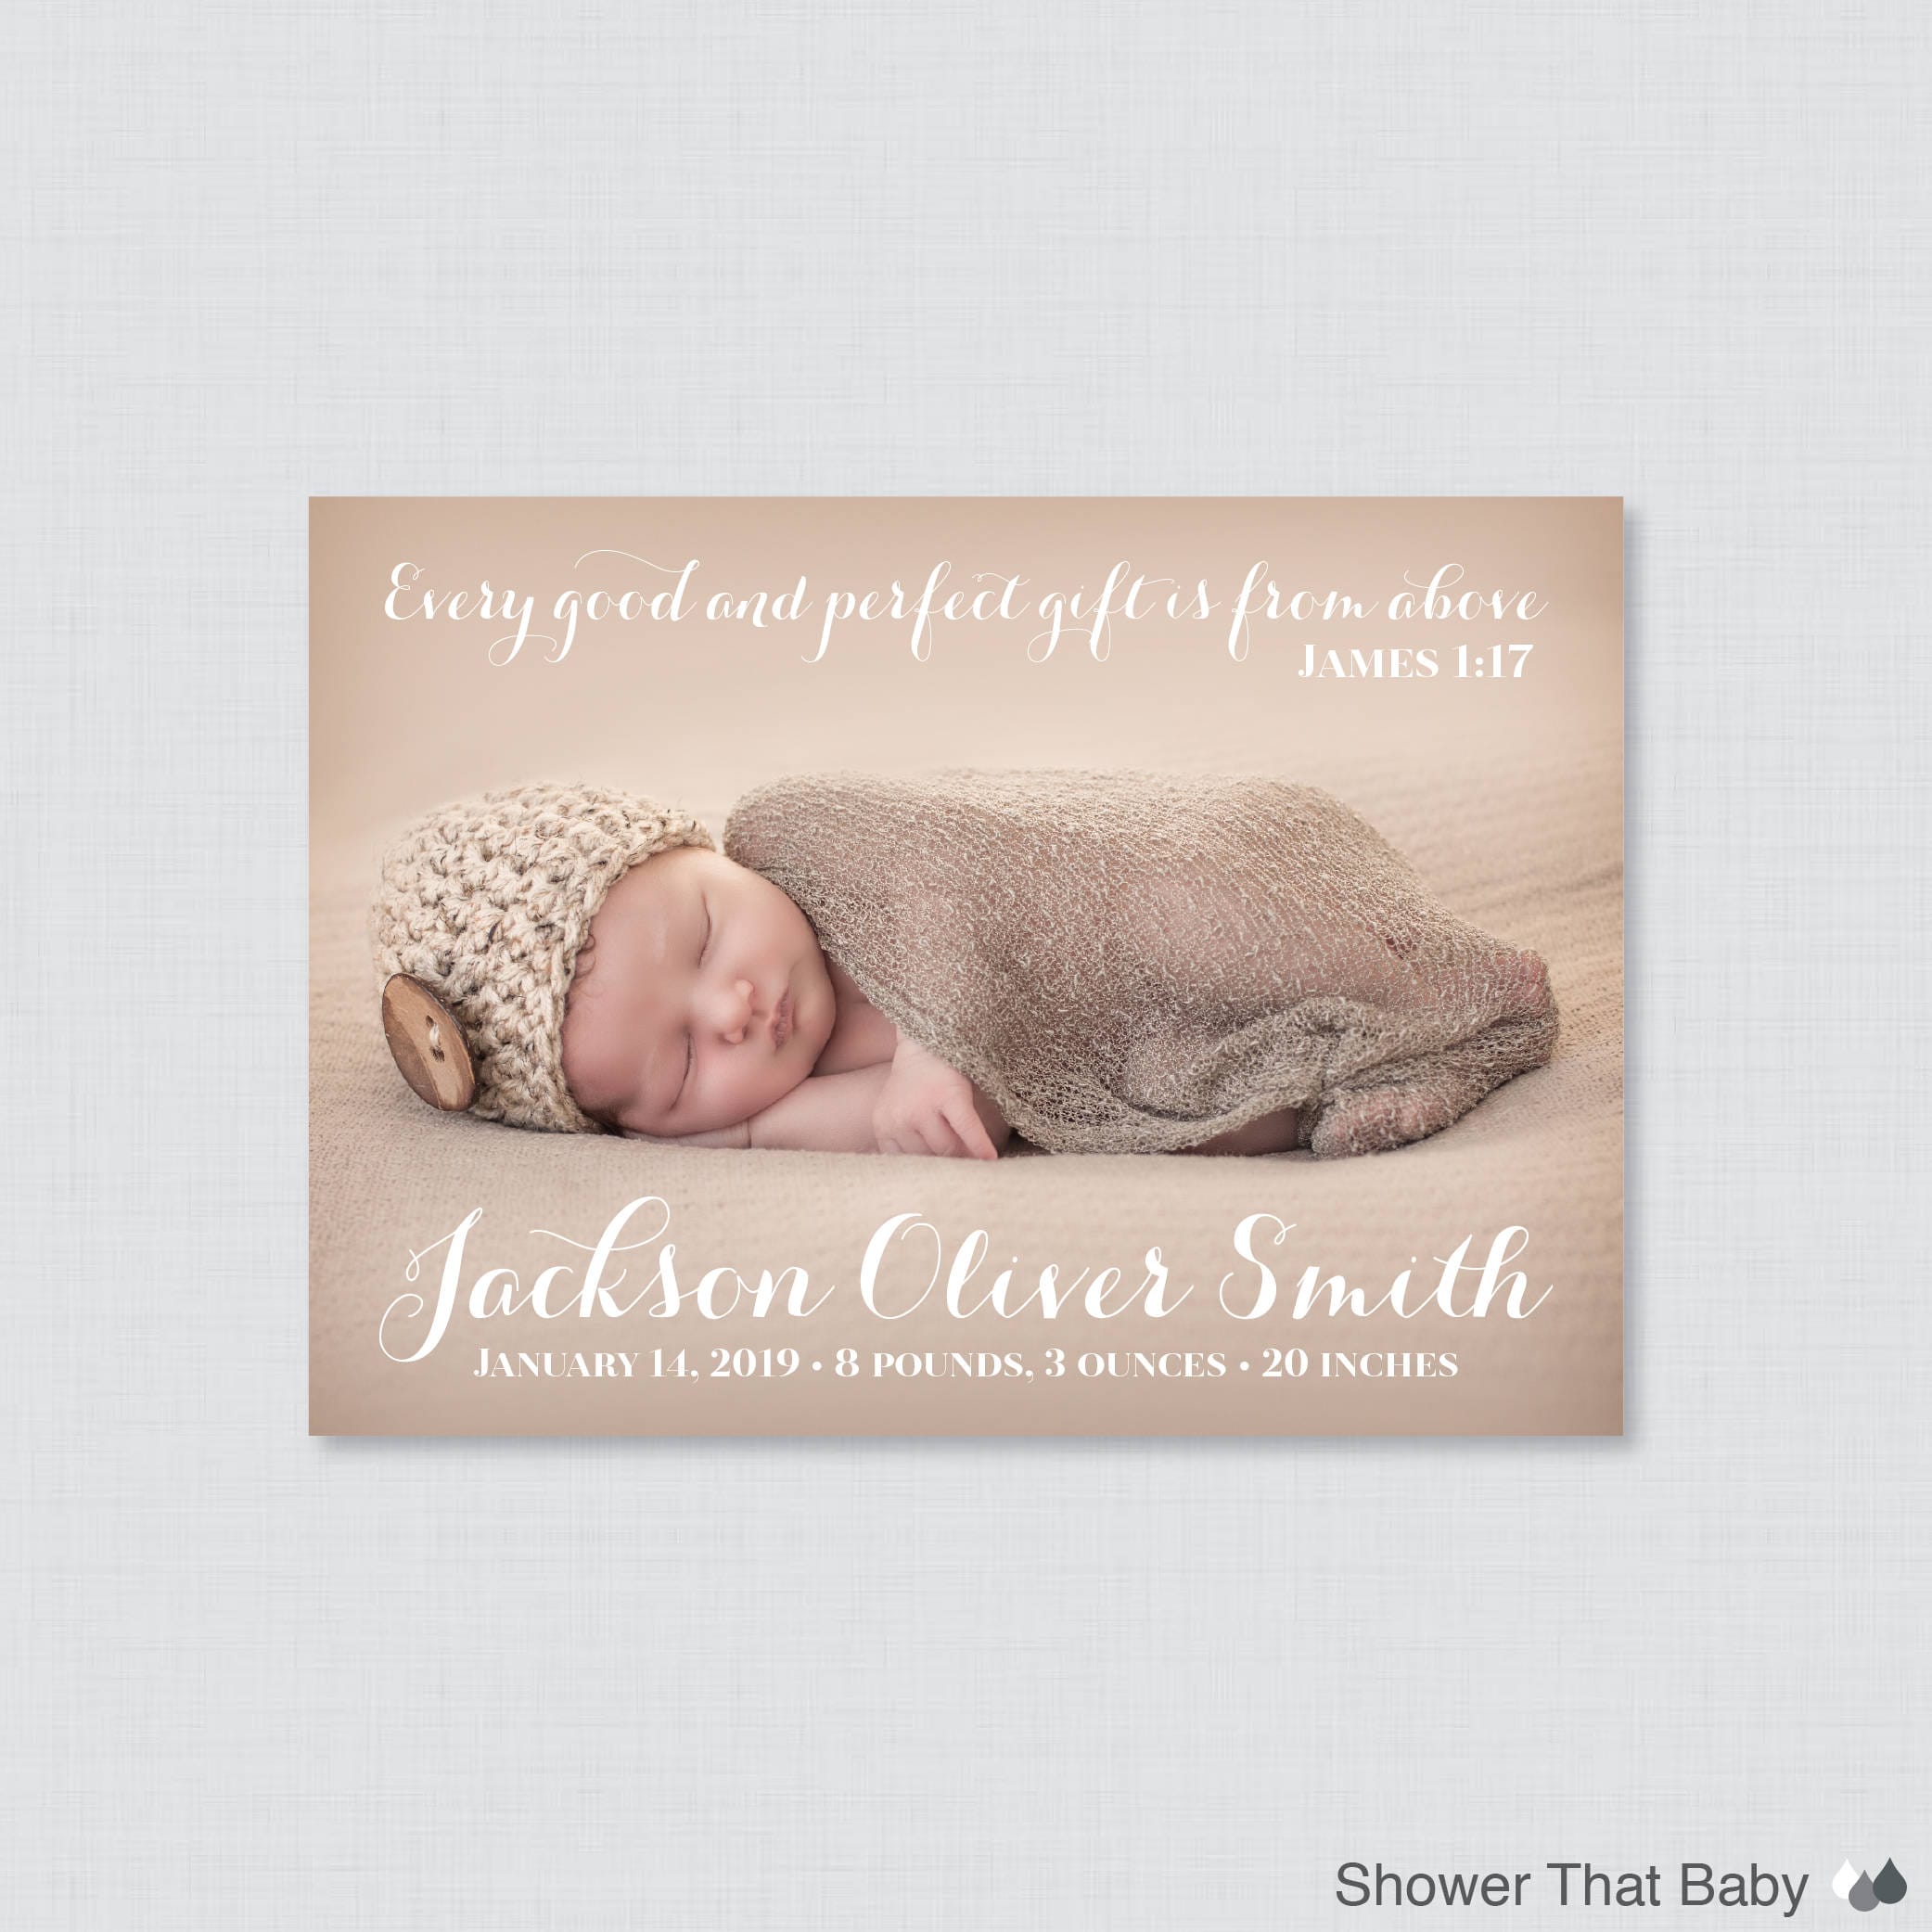 Printable Or Printed Picture Birth Announcement Cards - Announcements, Simple Announcement, Horizontal/Landscape Photo Ba05